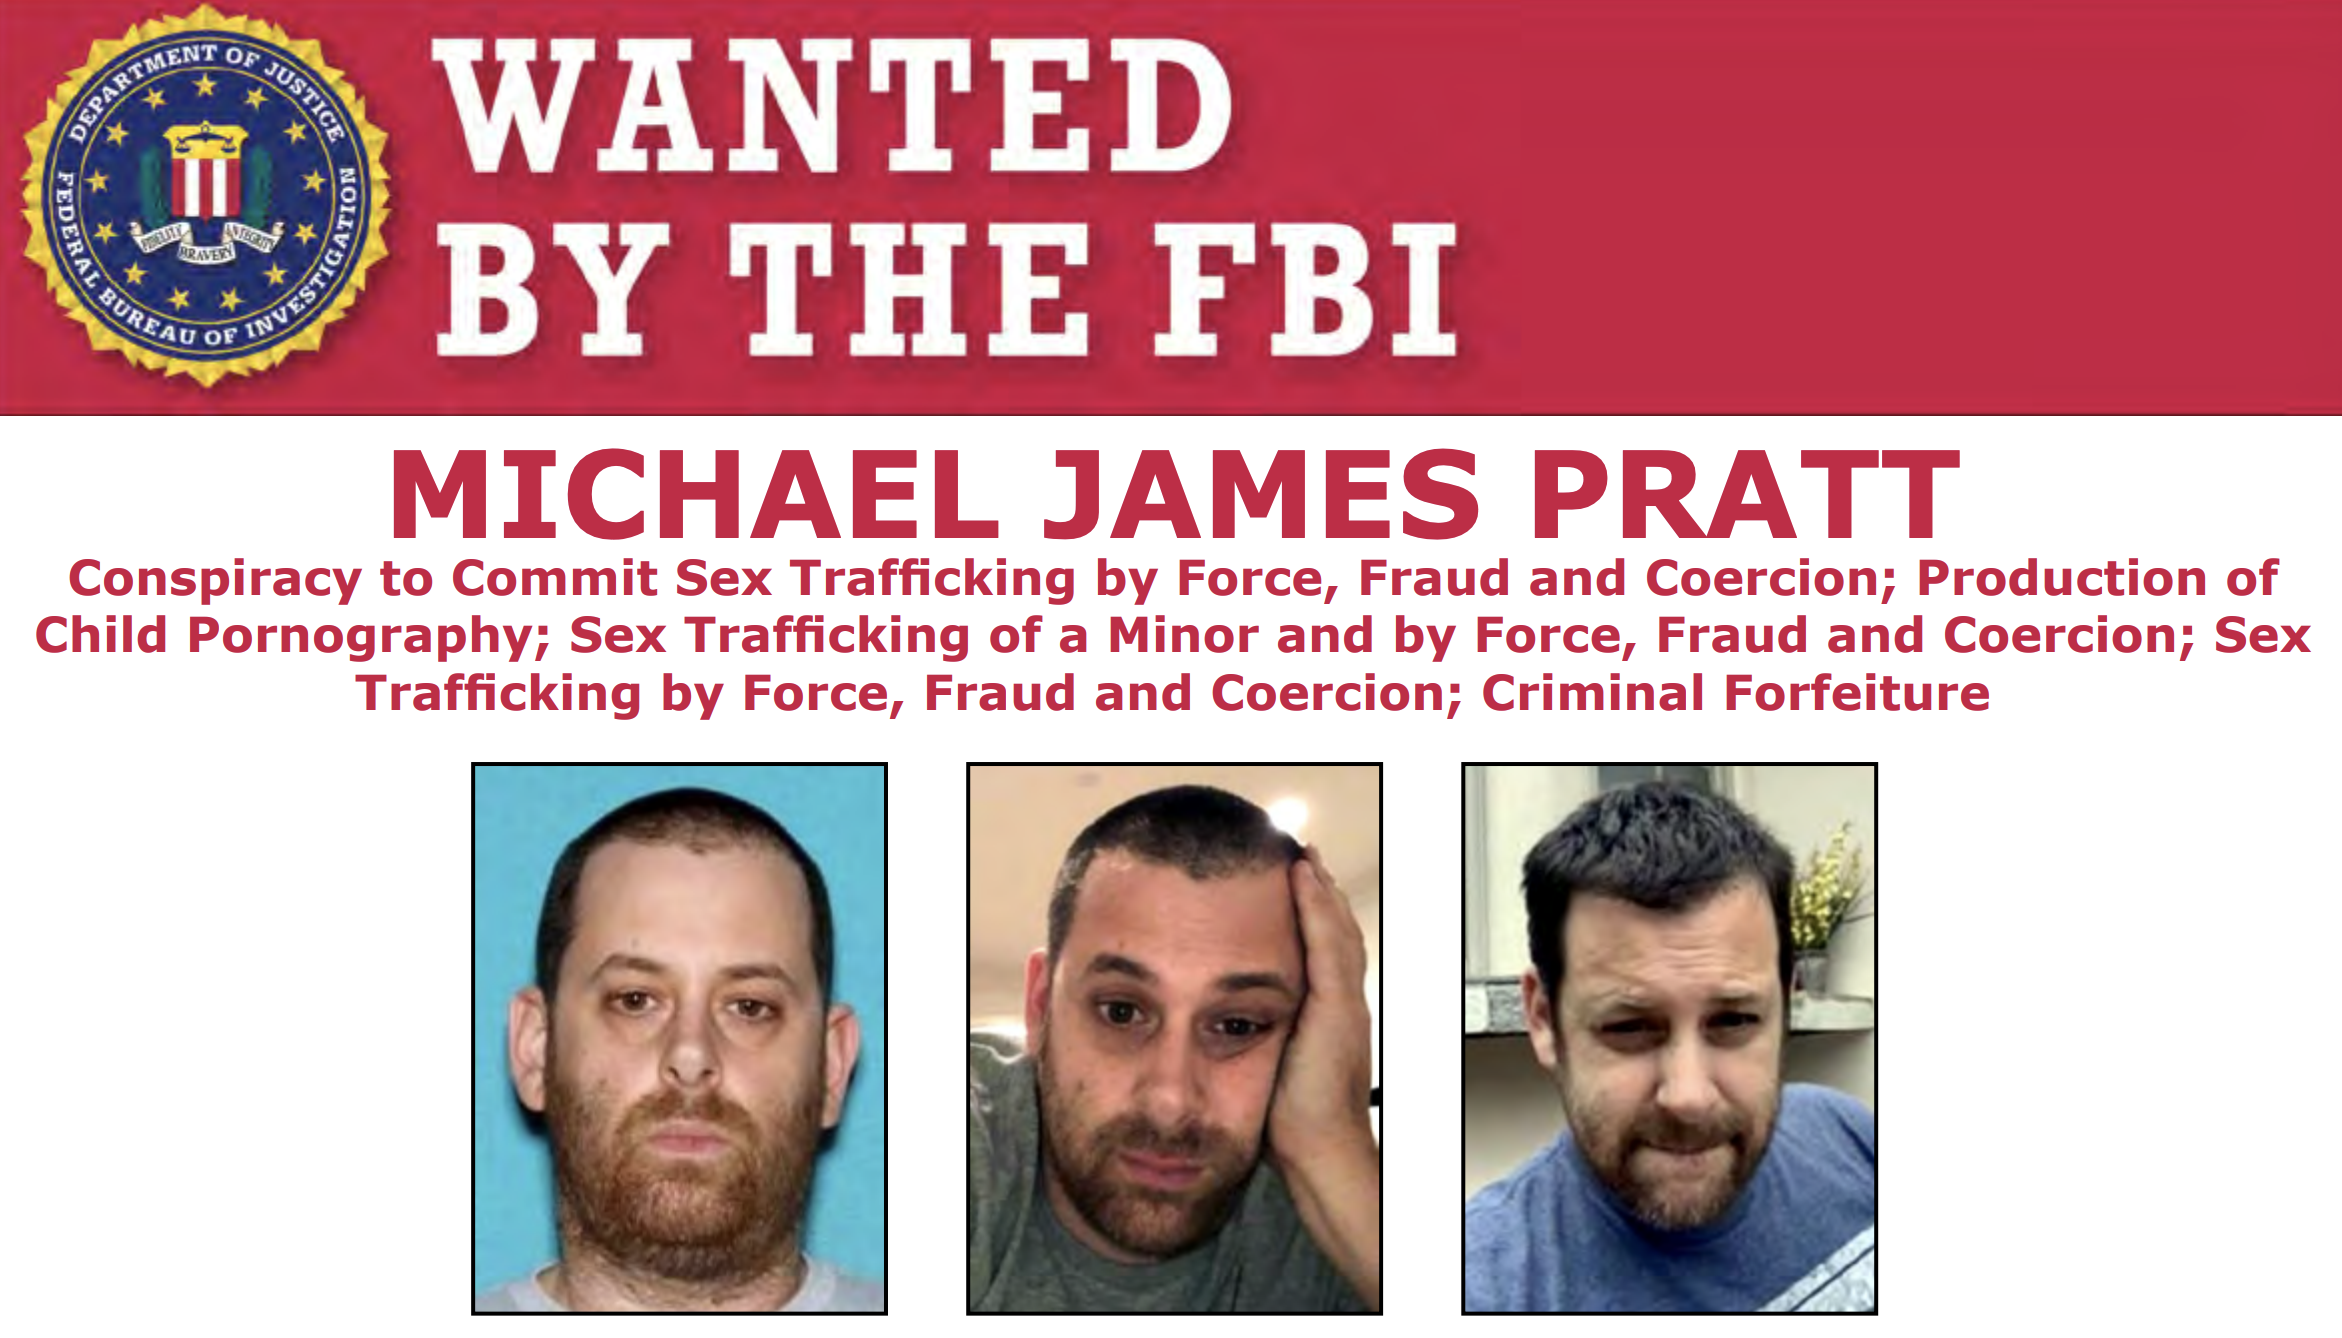 FBI Seeking Publics Assistance to Locate Michael James Pratt, Wanted for Sex Trafficking and Production of Child Pornography — picture